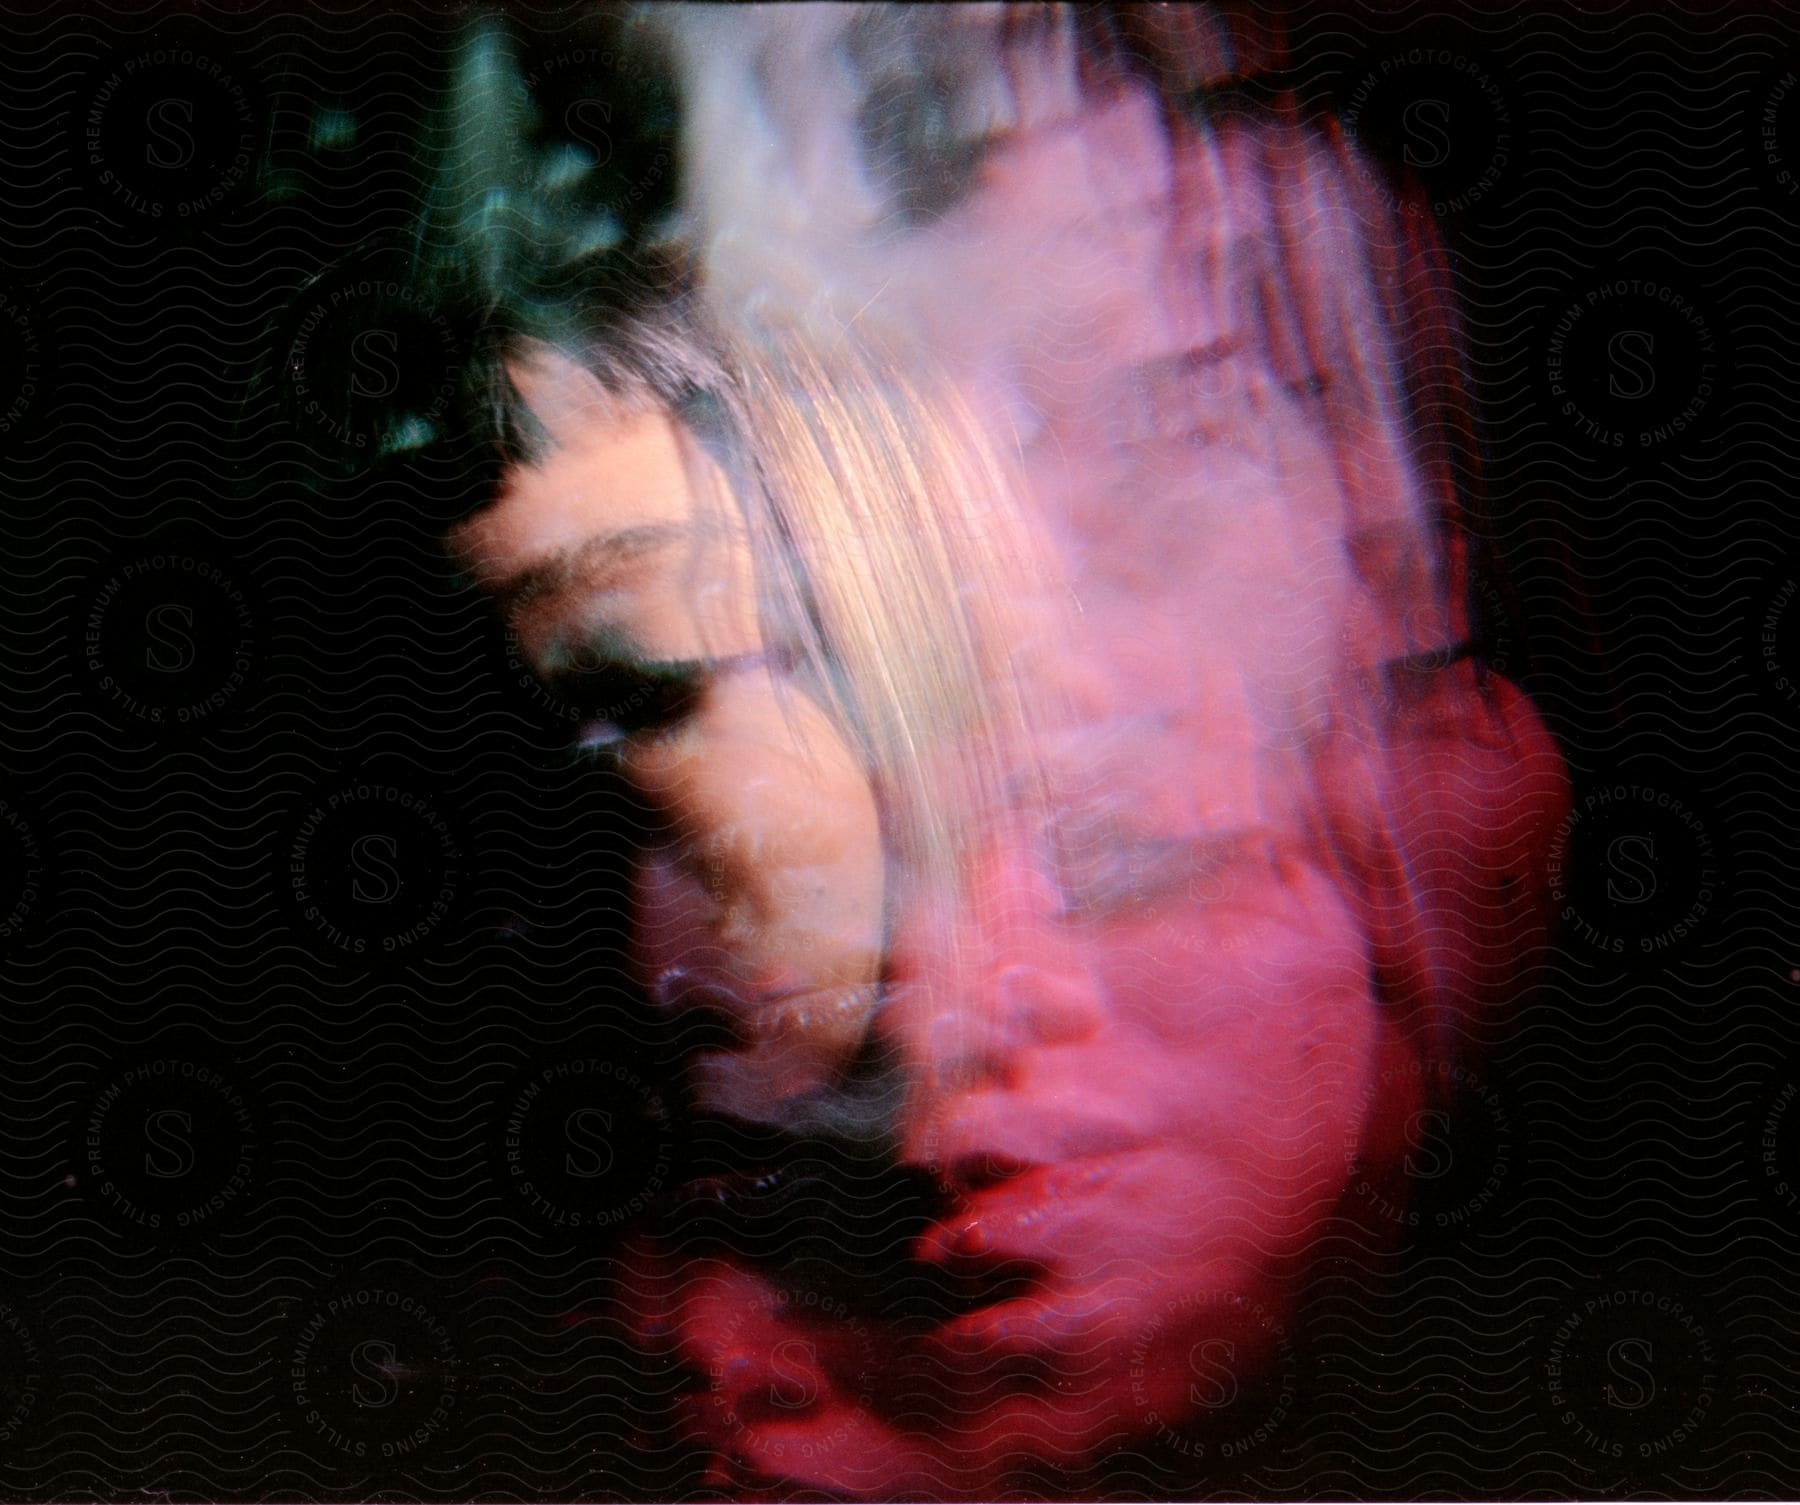 Distorted female face with multiple lighting exposures